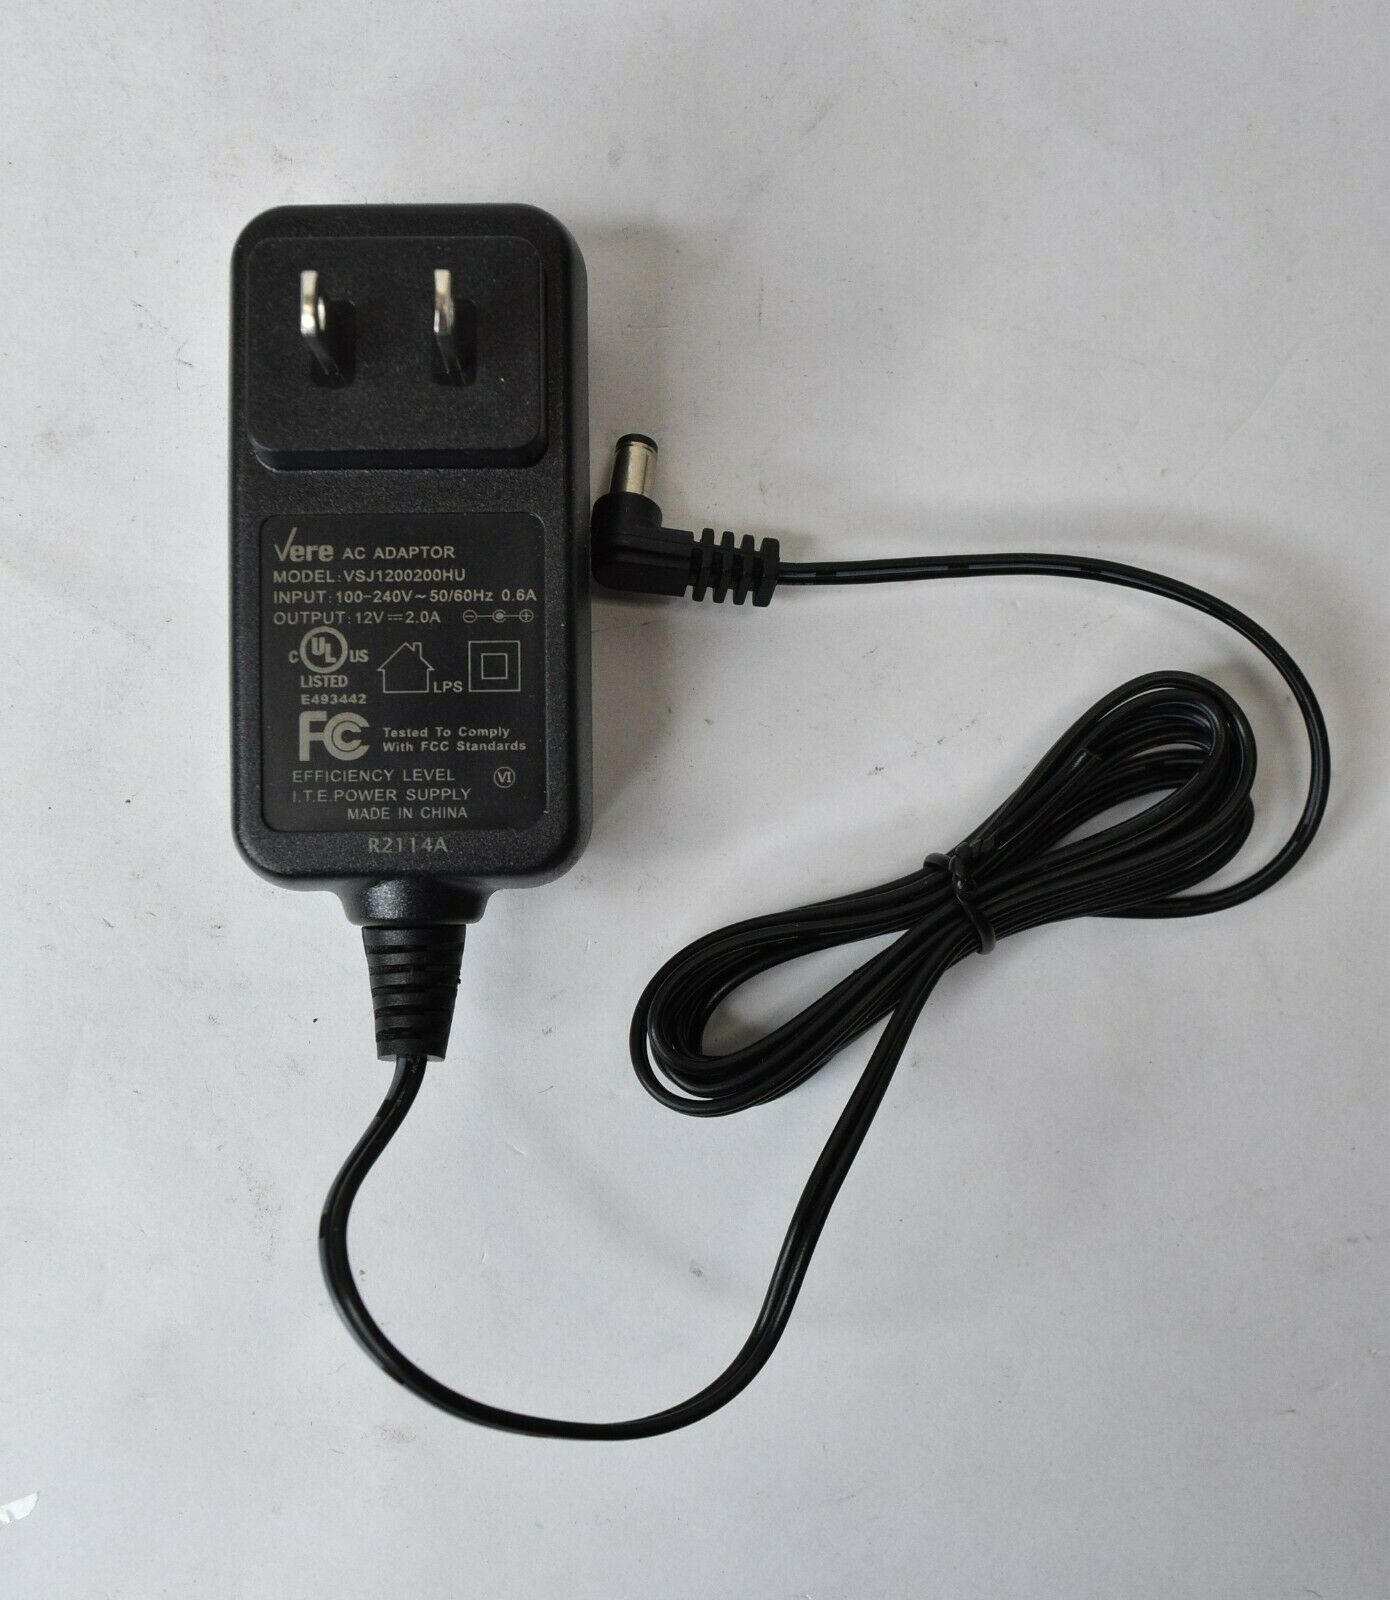 Vere AC ADapter Power Supply Unit VSJ1200200HU 12V 2A Type: AC/AC Adapter Connection Split/Duplication: 1:2 Featur